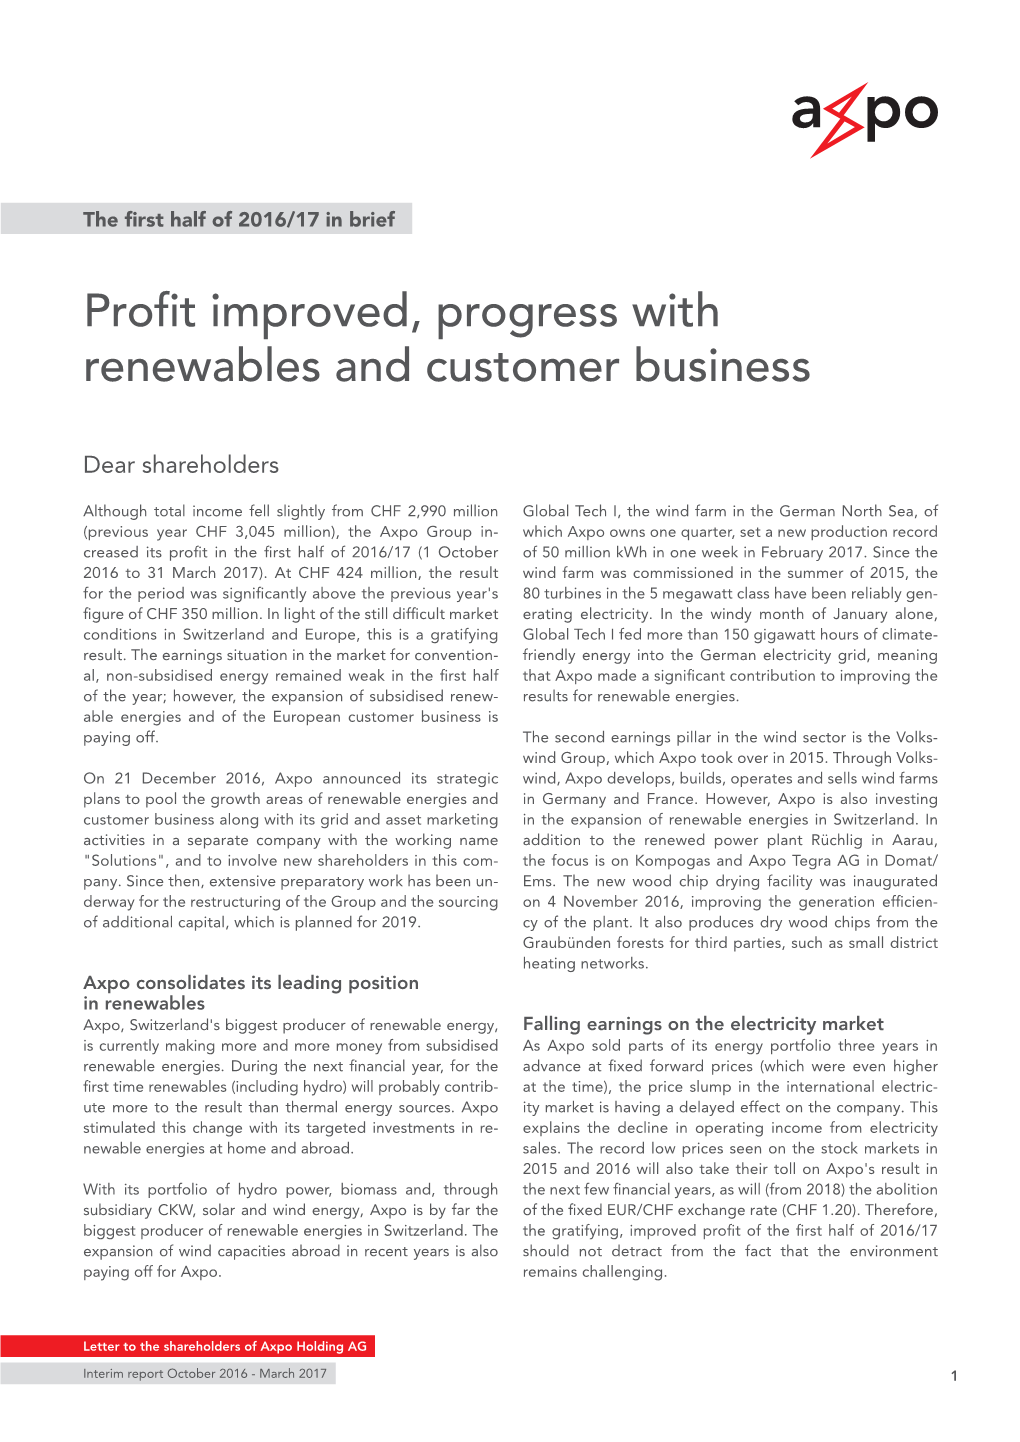 Profit Improved, Progress with Renewables and Customer Business